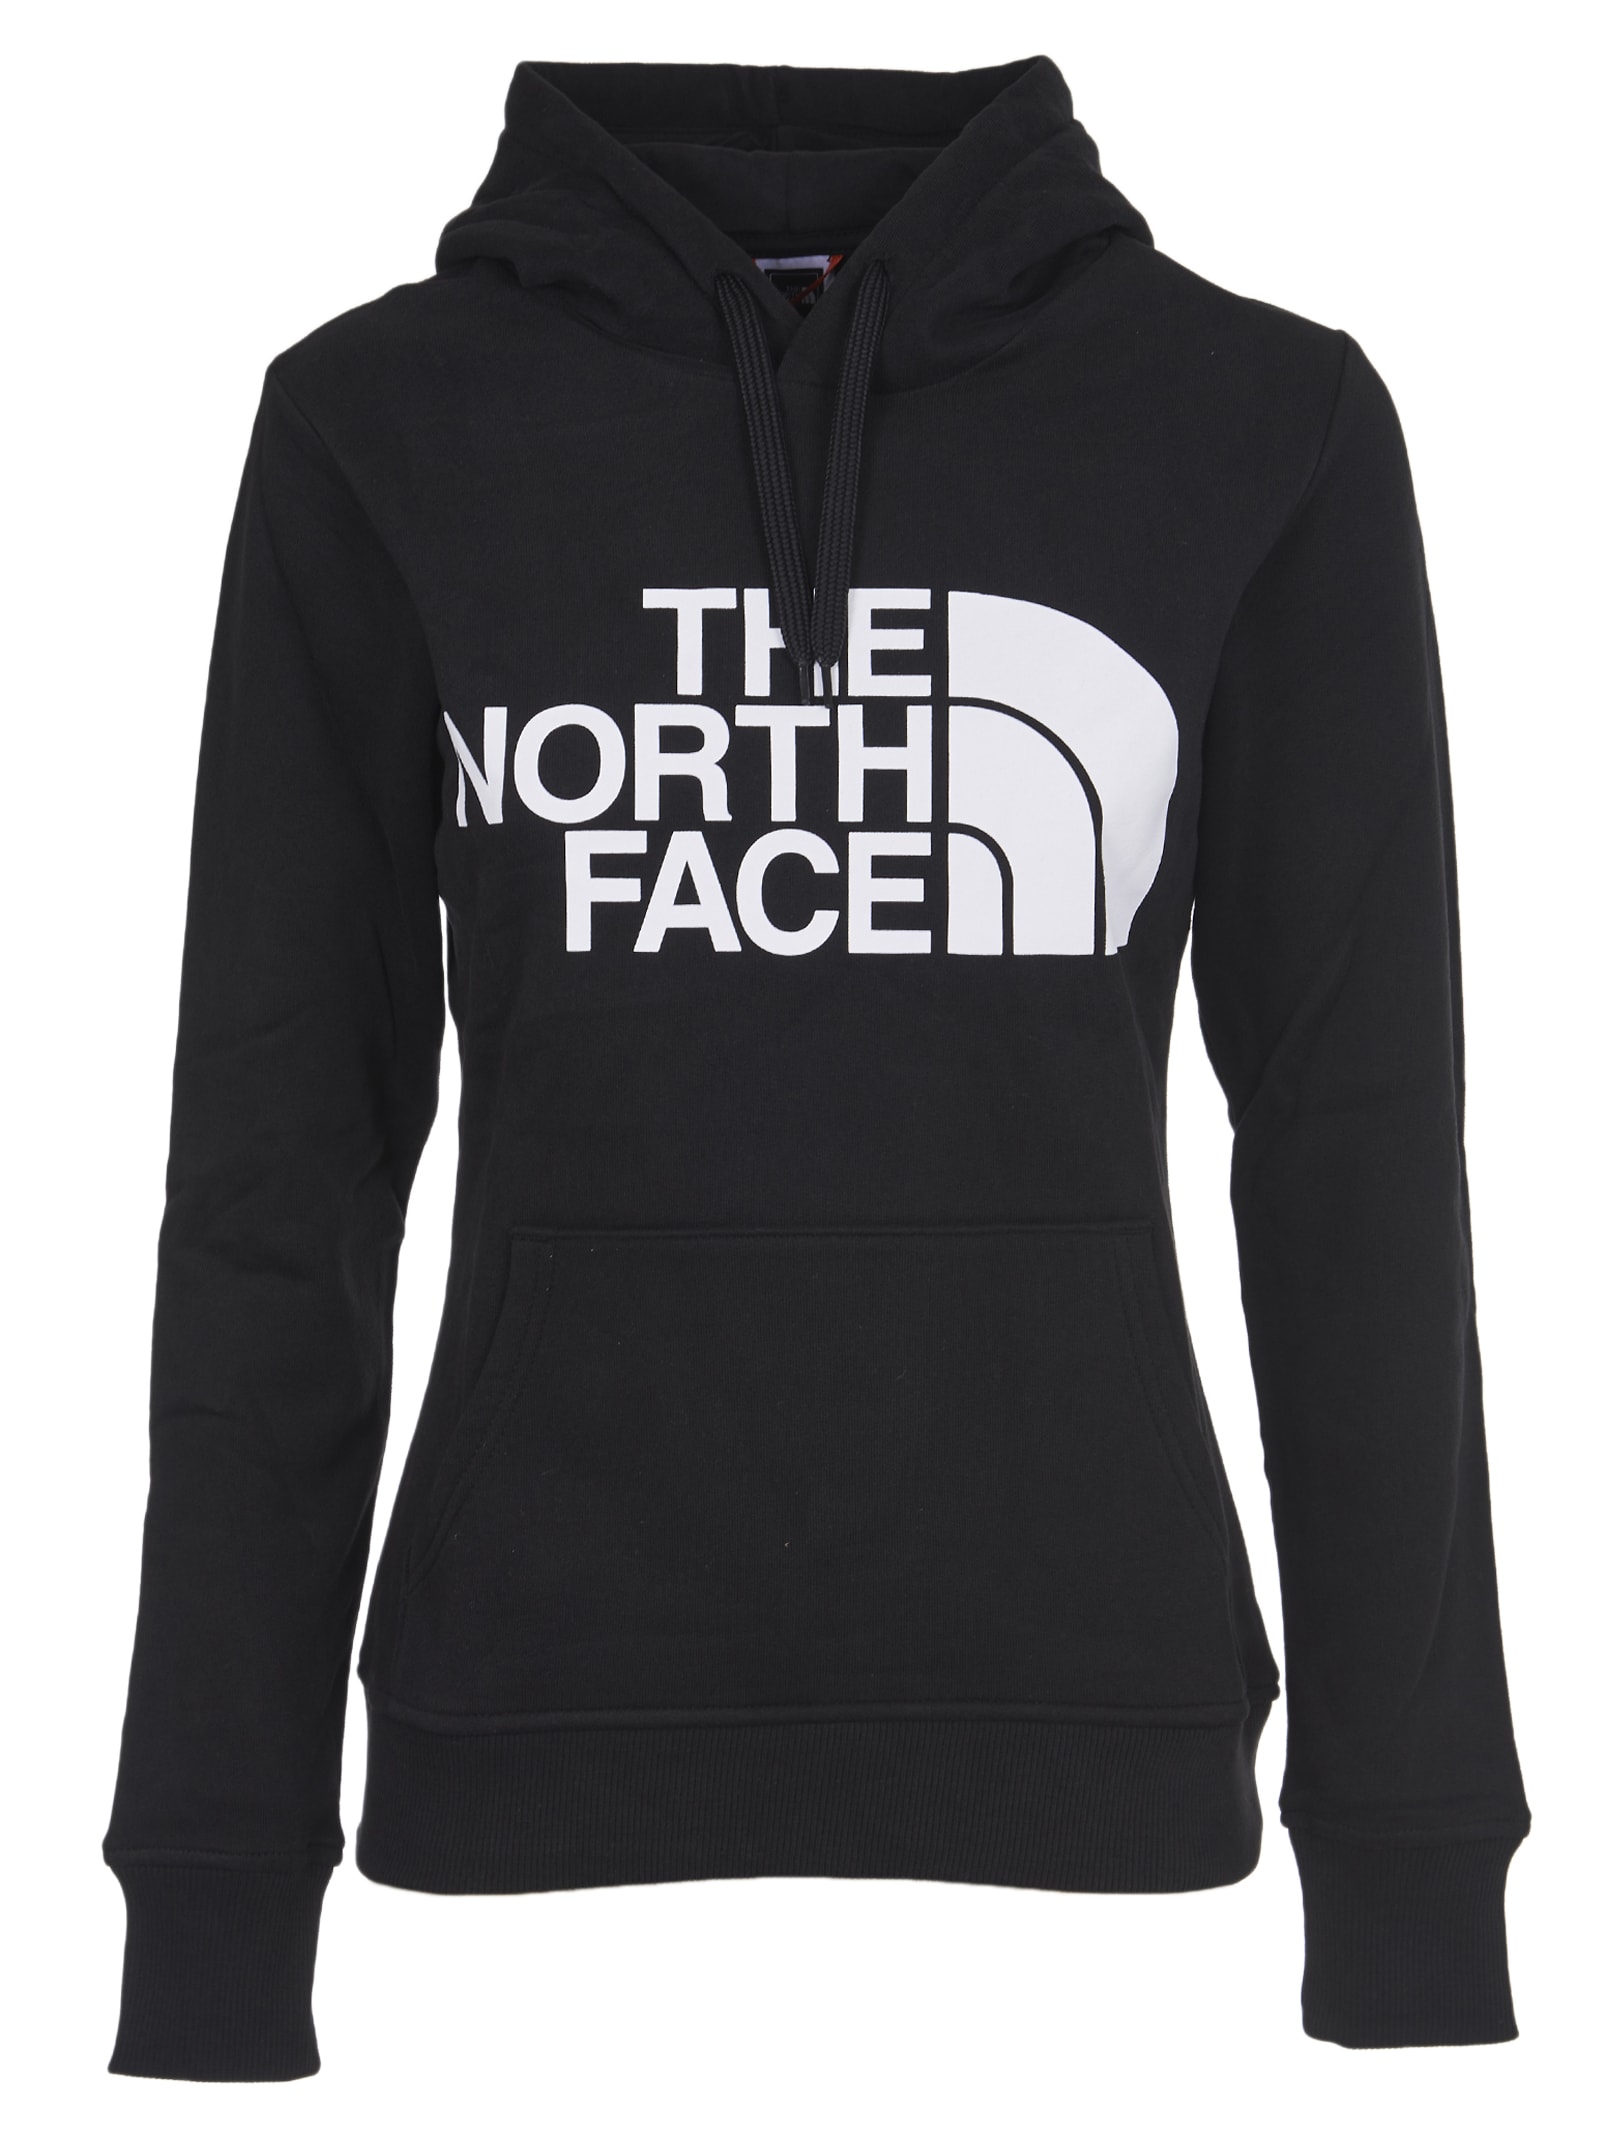 The North Face Black Hoodie With Logo